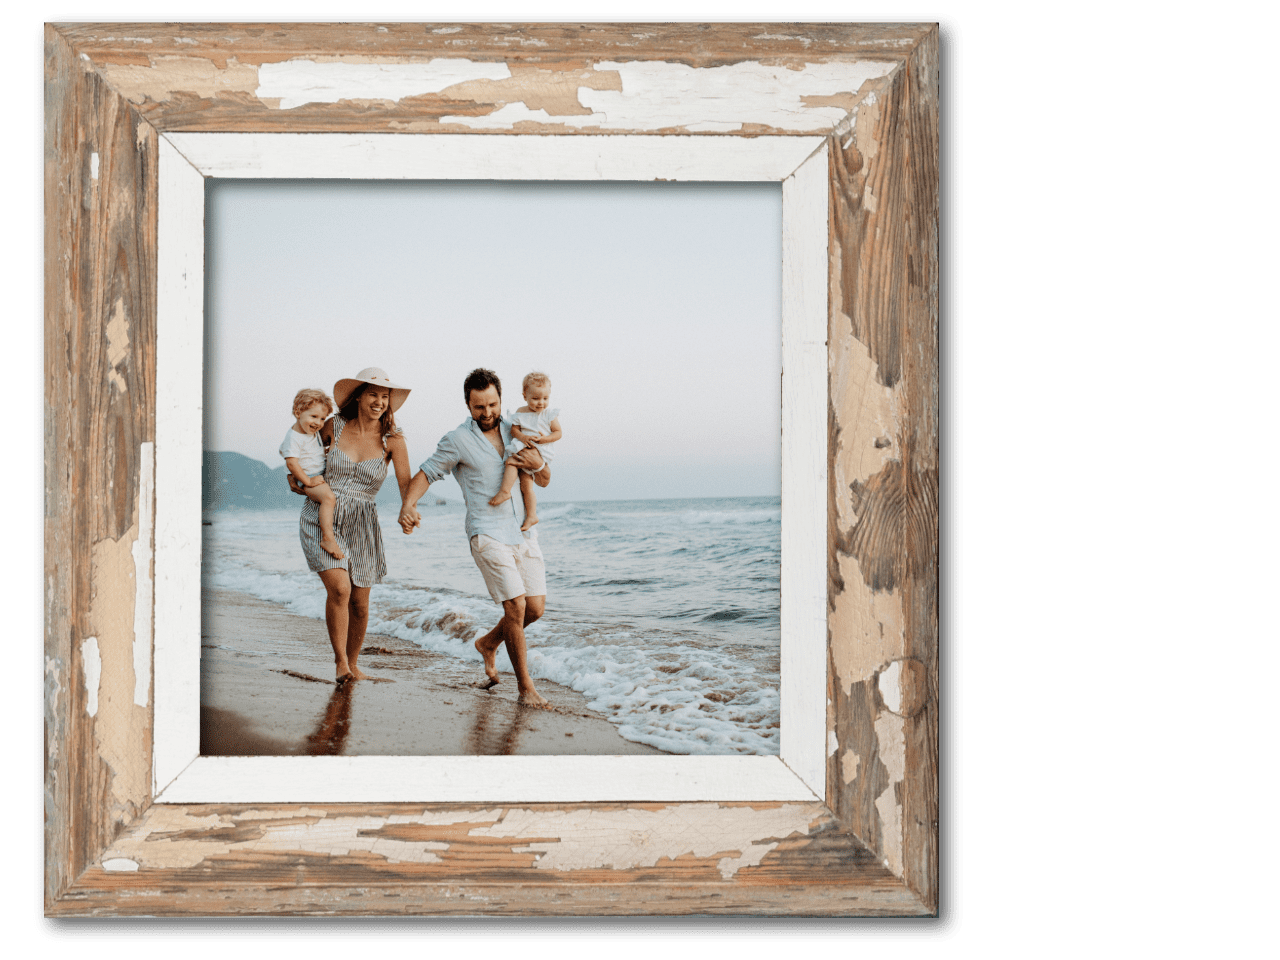 Choosing the right photo frames for your images